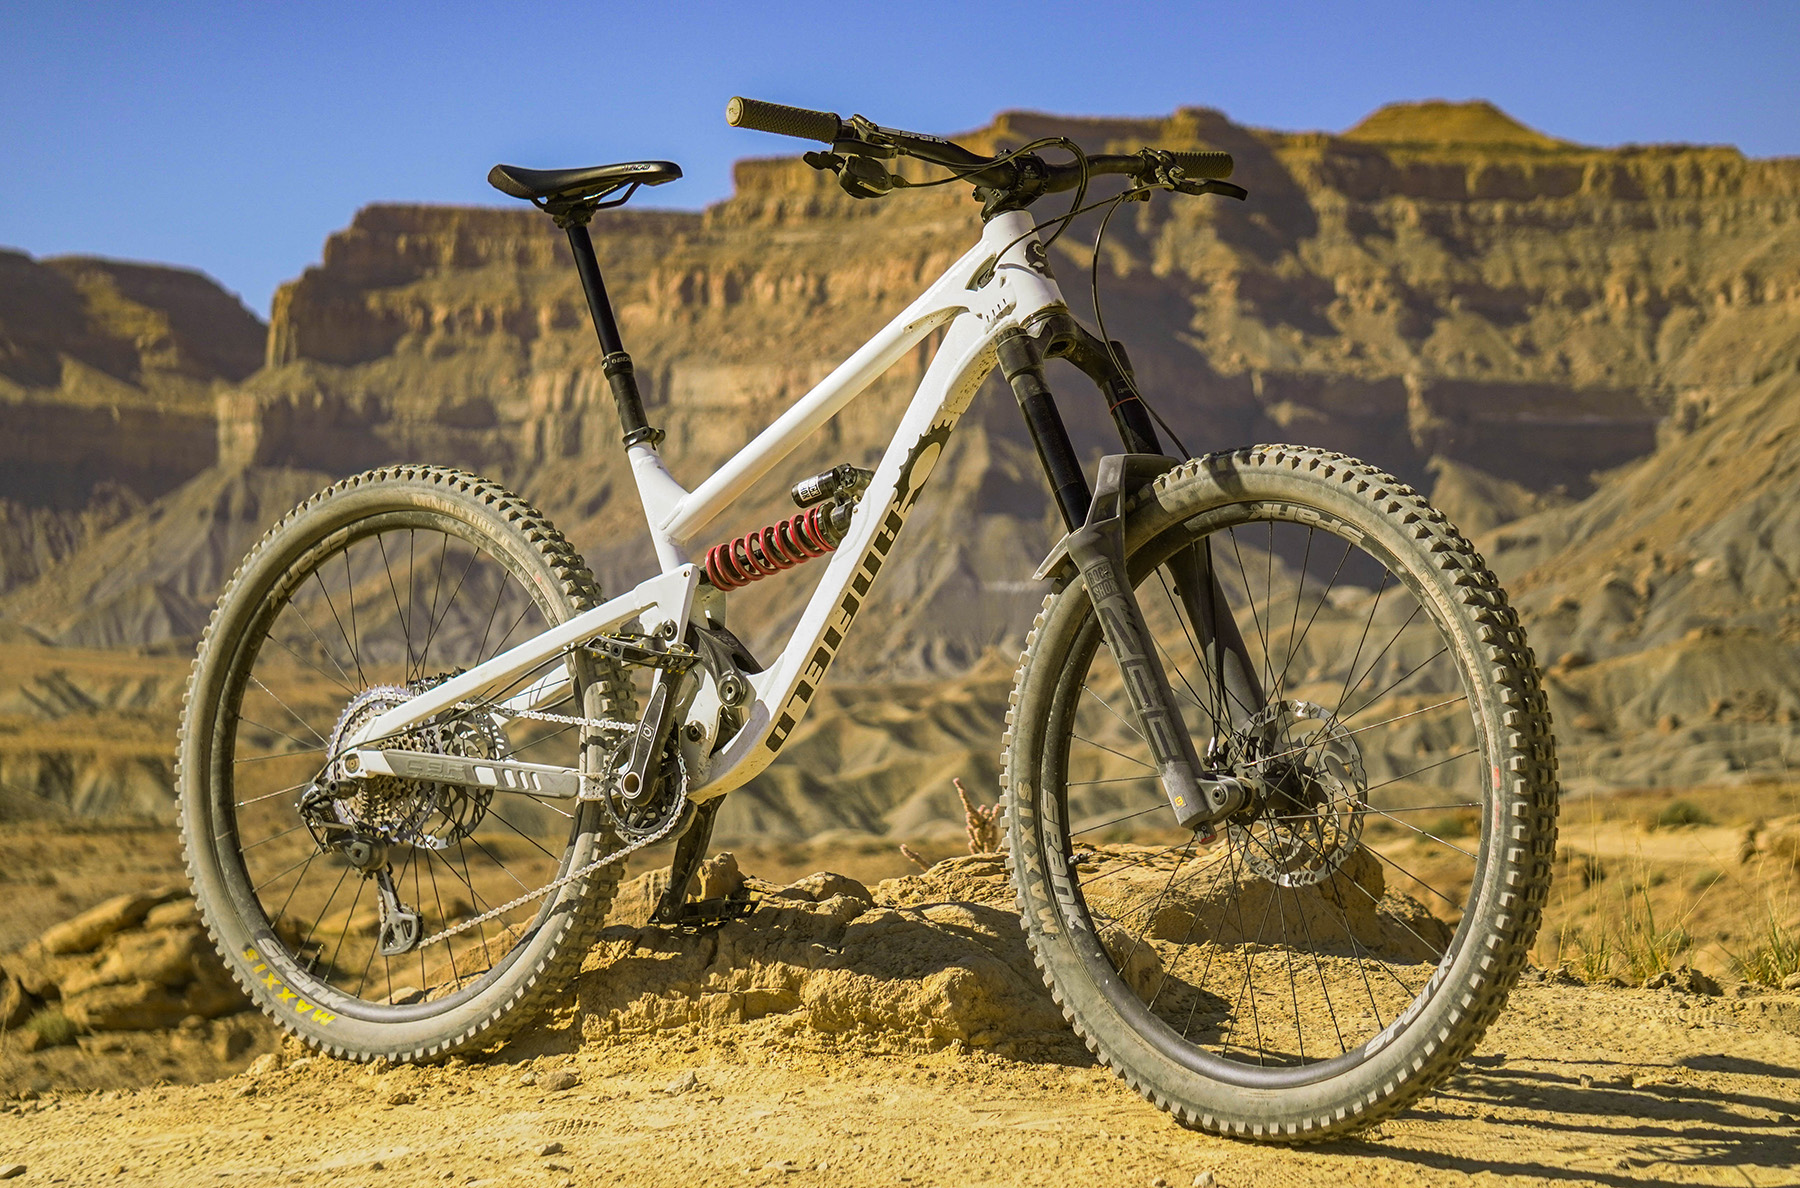 Dylan Wood and David Golay review the Canfield One.2 Super Enduro for Blister